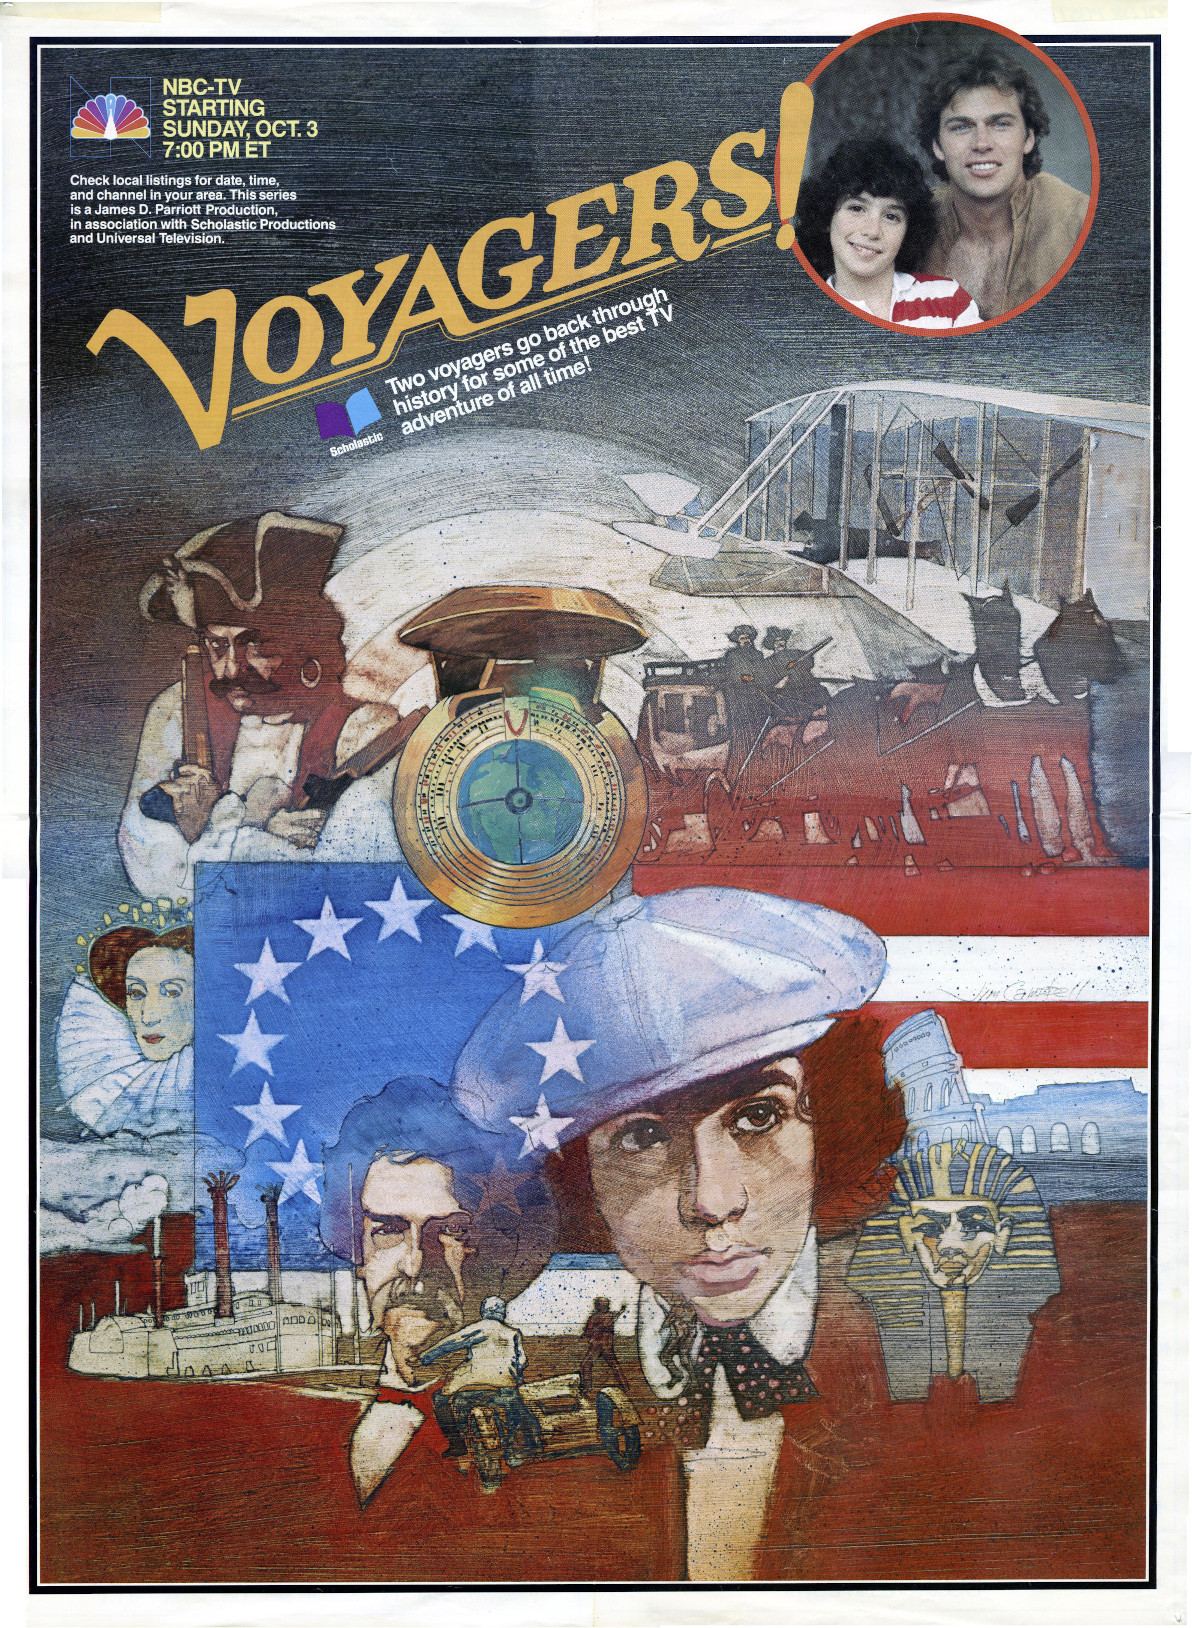 Voyagers Poster-1982-cover